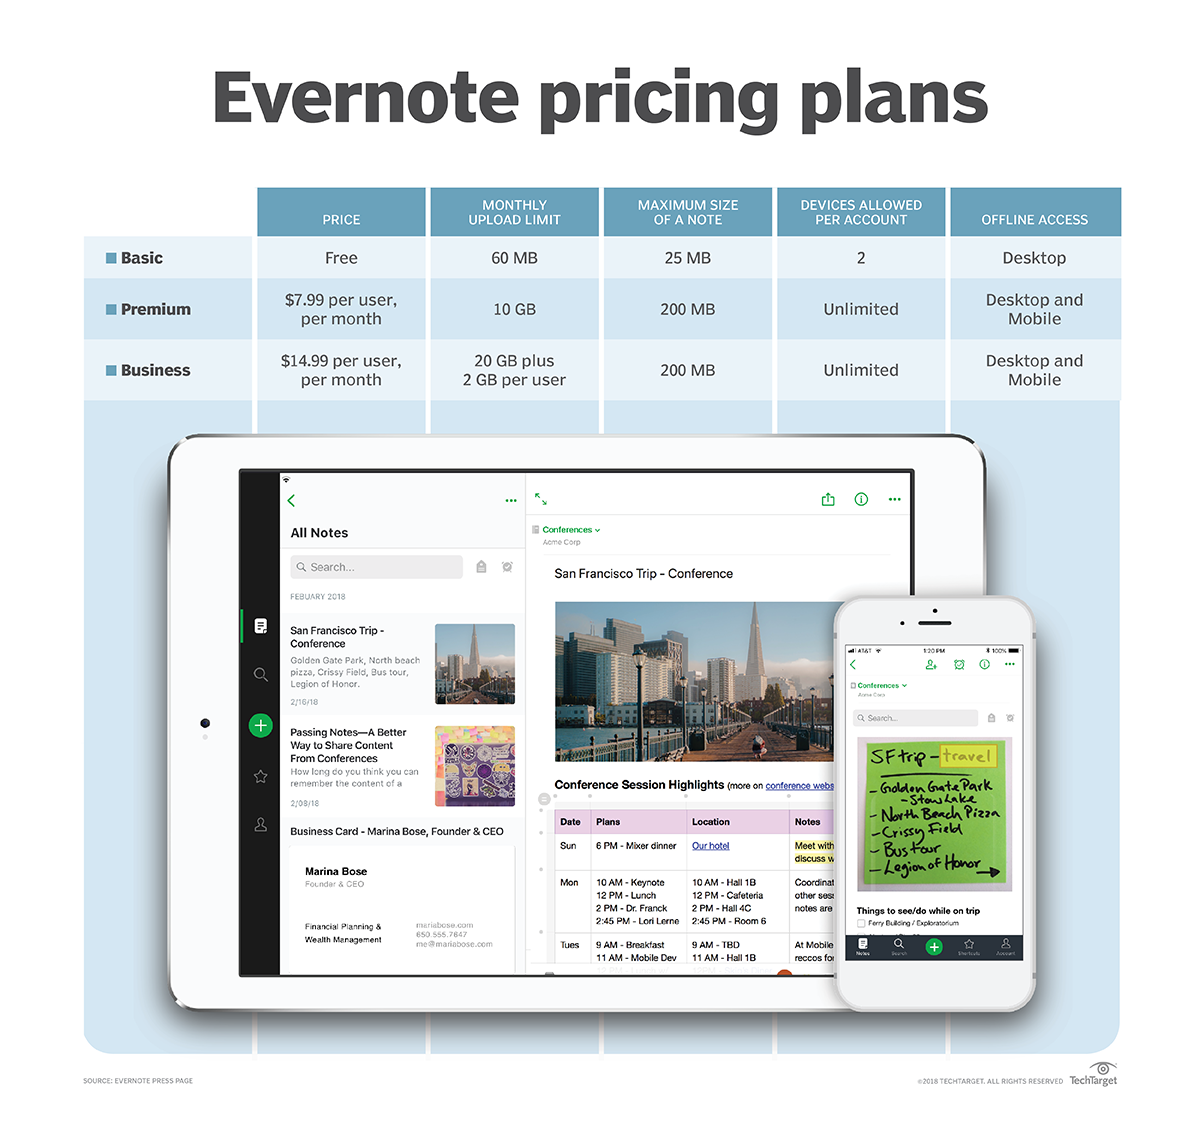 Thumbnail Image: Evernote mobile app helps fill productivity gaps